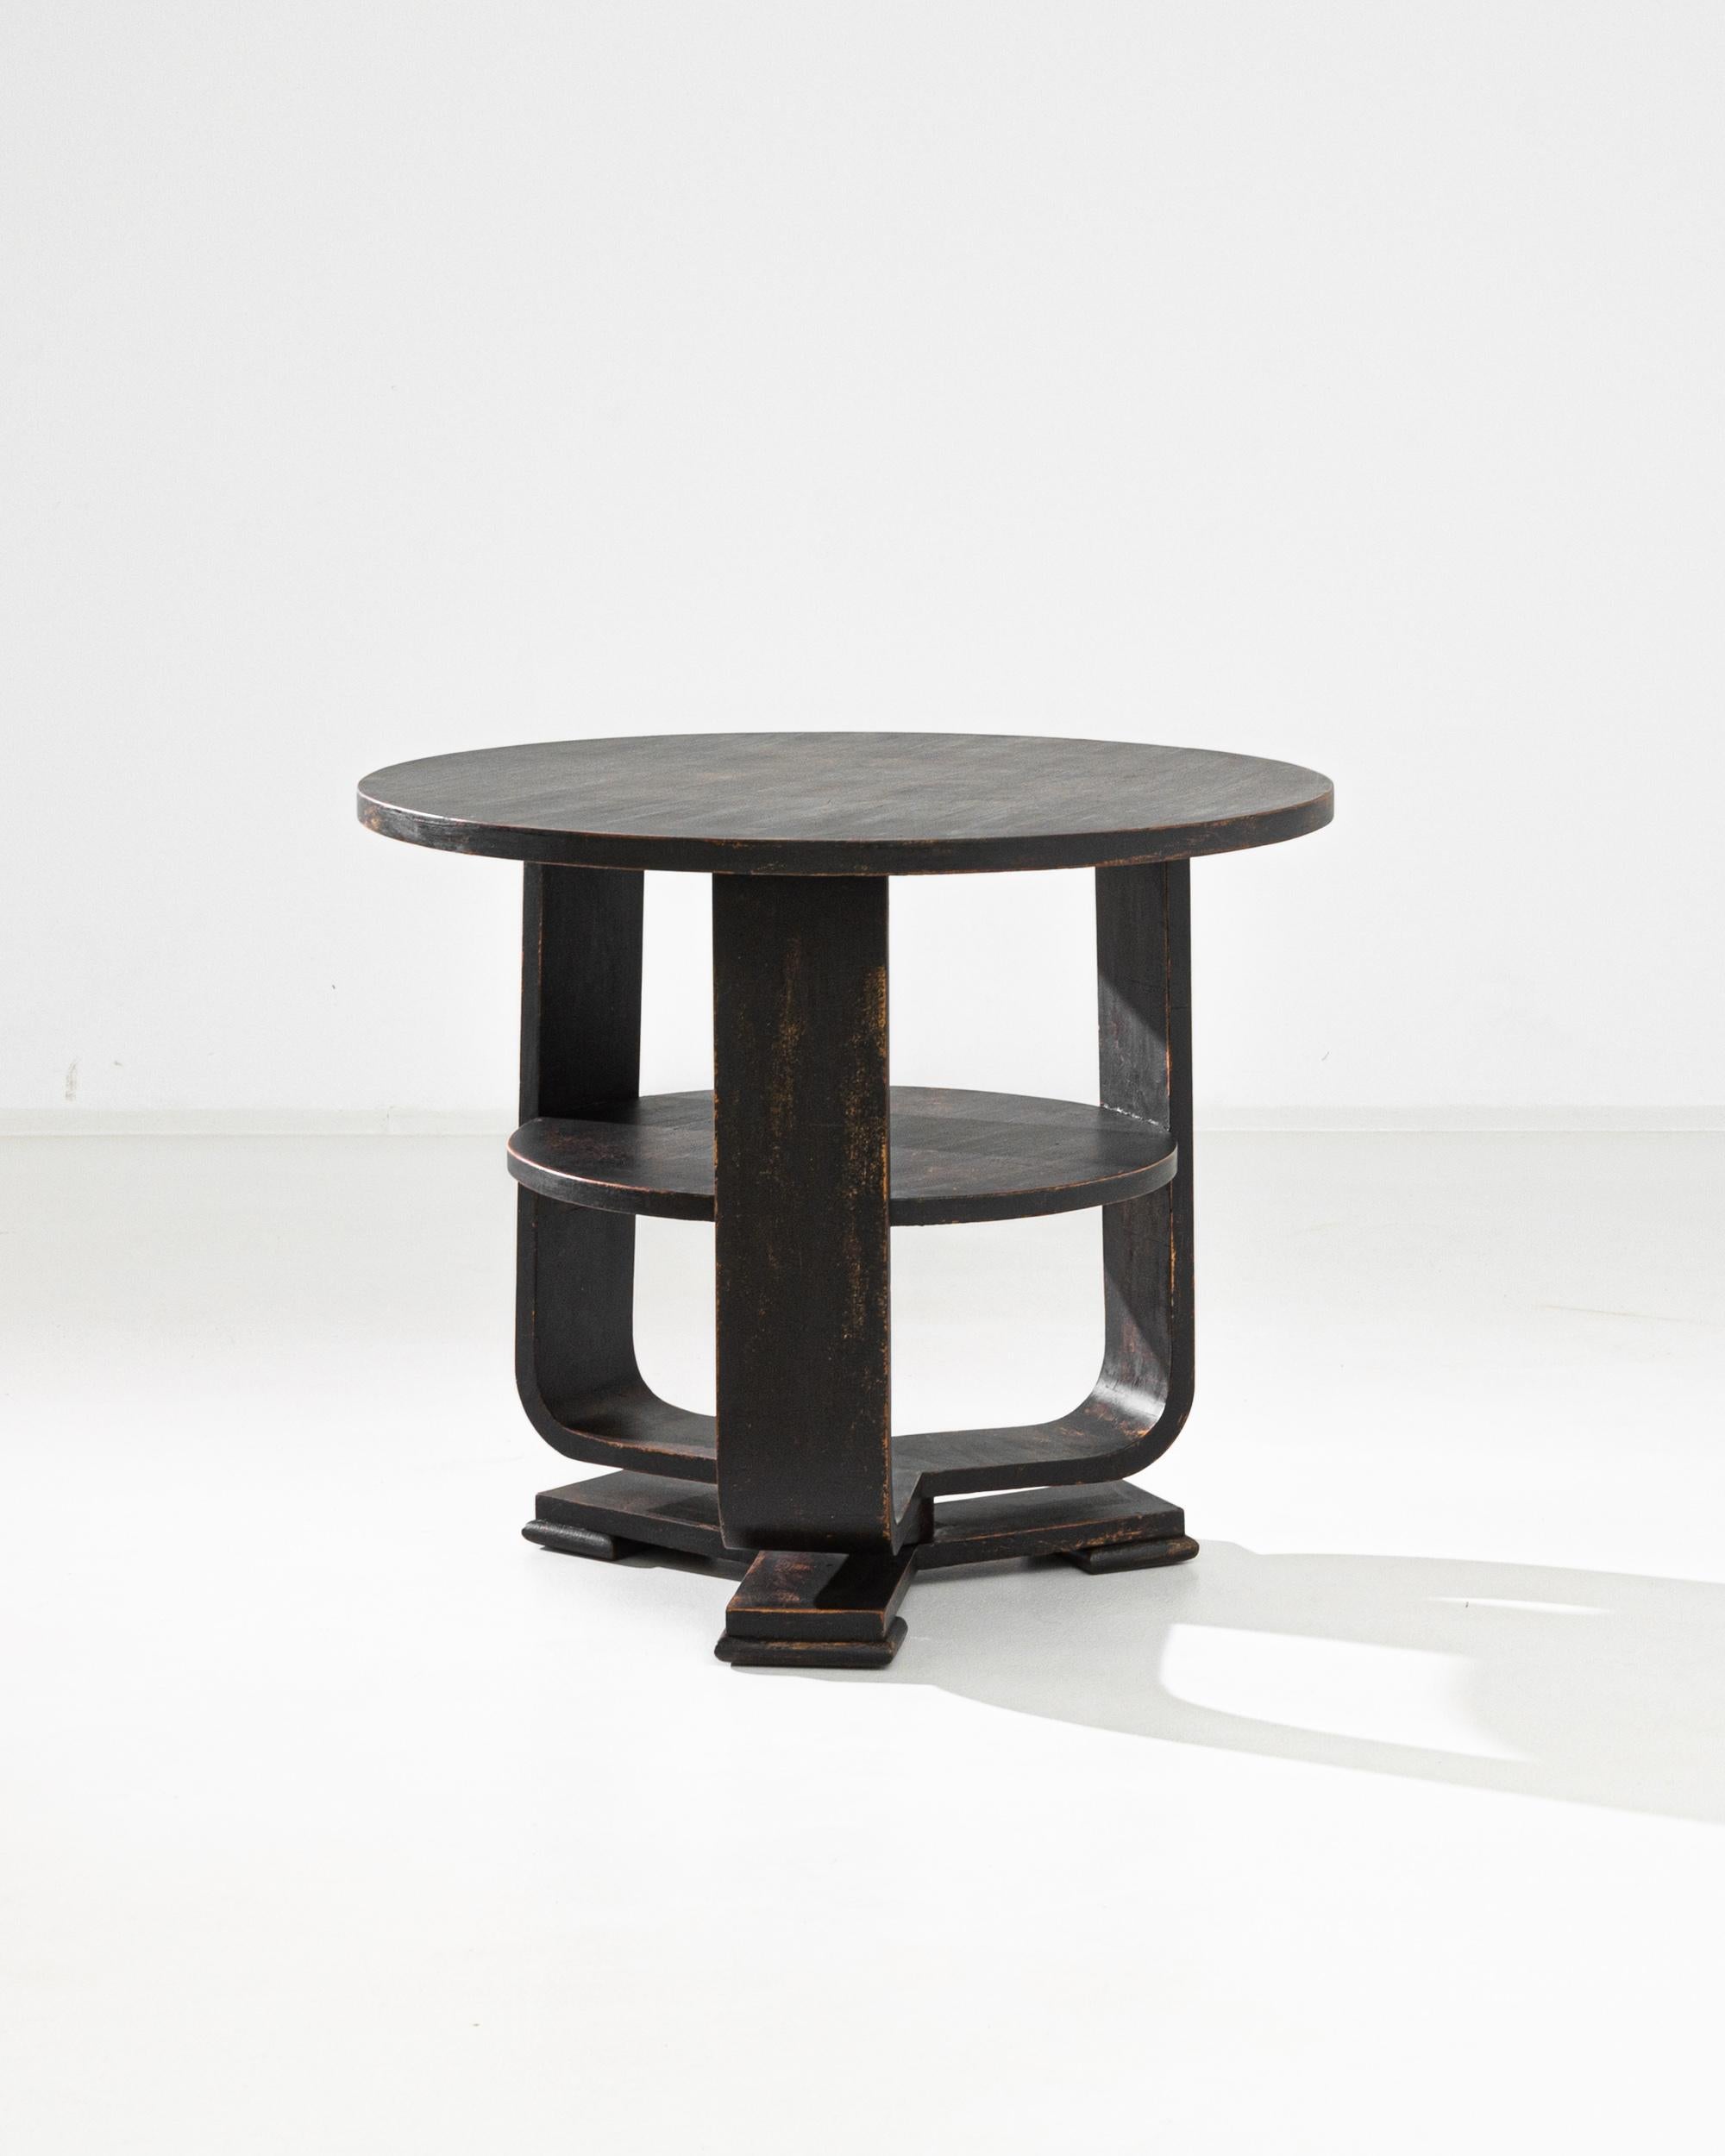 A black patinated wooden table from France, produced circa 1930. A characteristic Art Deco side table stands as a chic statement.